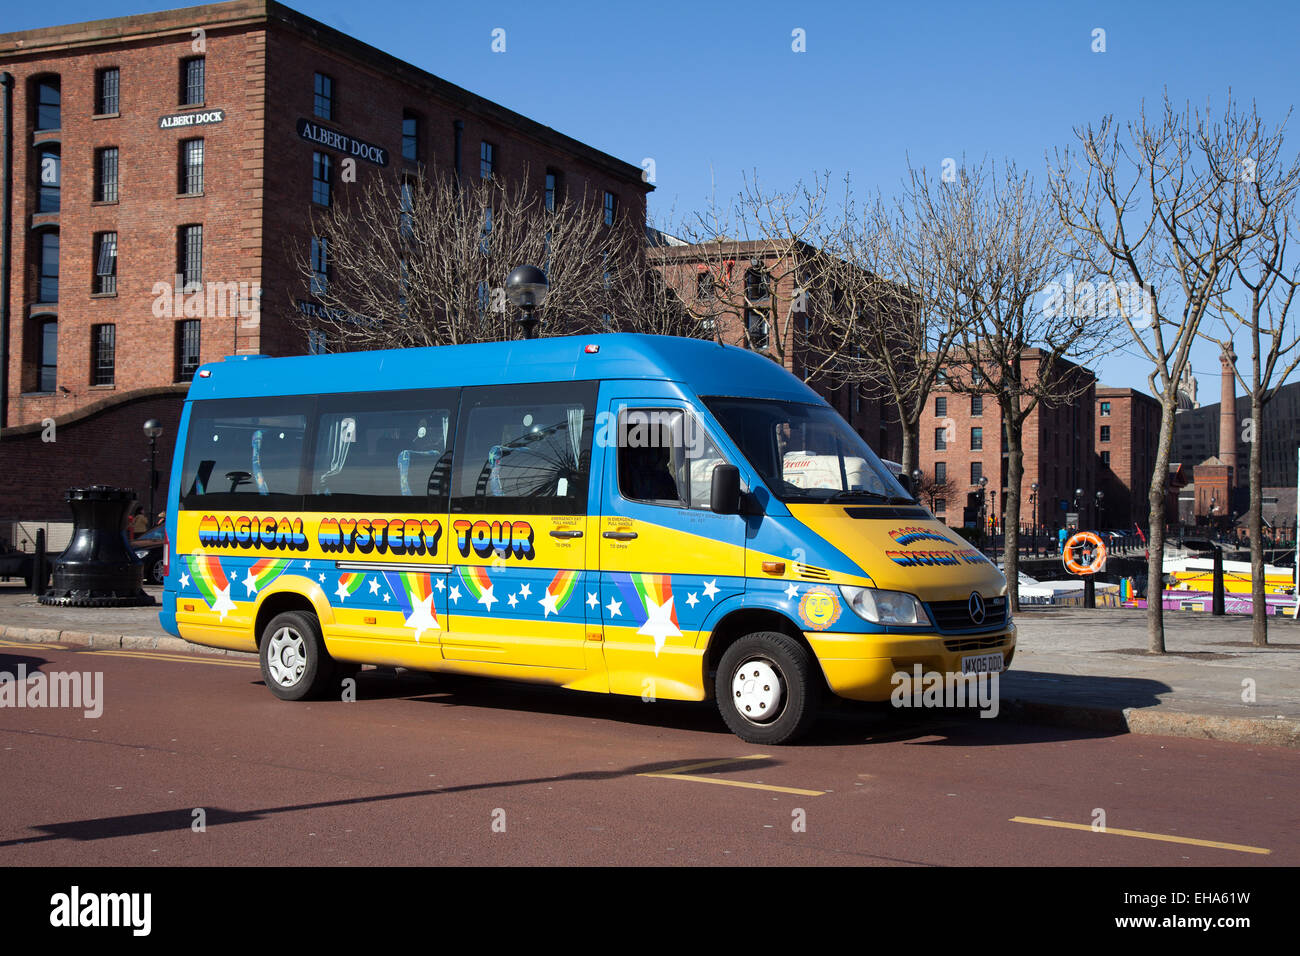 Beatlmania PSV, Liverpool, Merseyside, UK. 10th March, 2015.  UK Weather.  Magical Mystery Tour Bus  Bright Spring Sunshine in Liverpool as Tourist attractions gear up for an influx of foreign tourists. Stock Photo